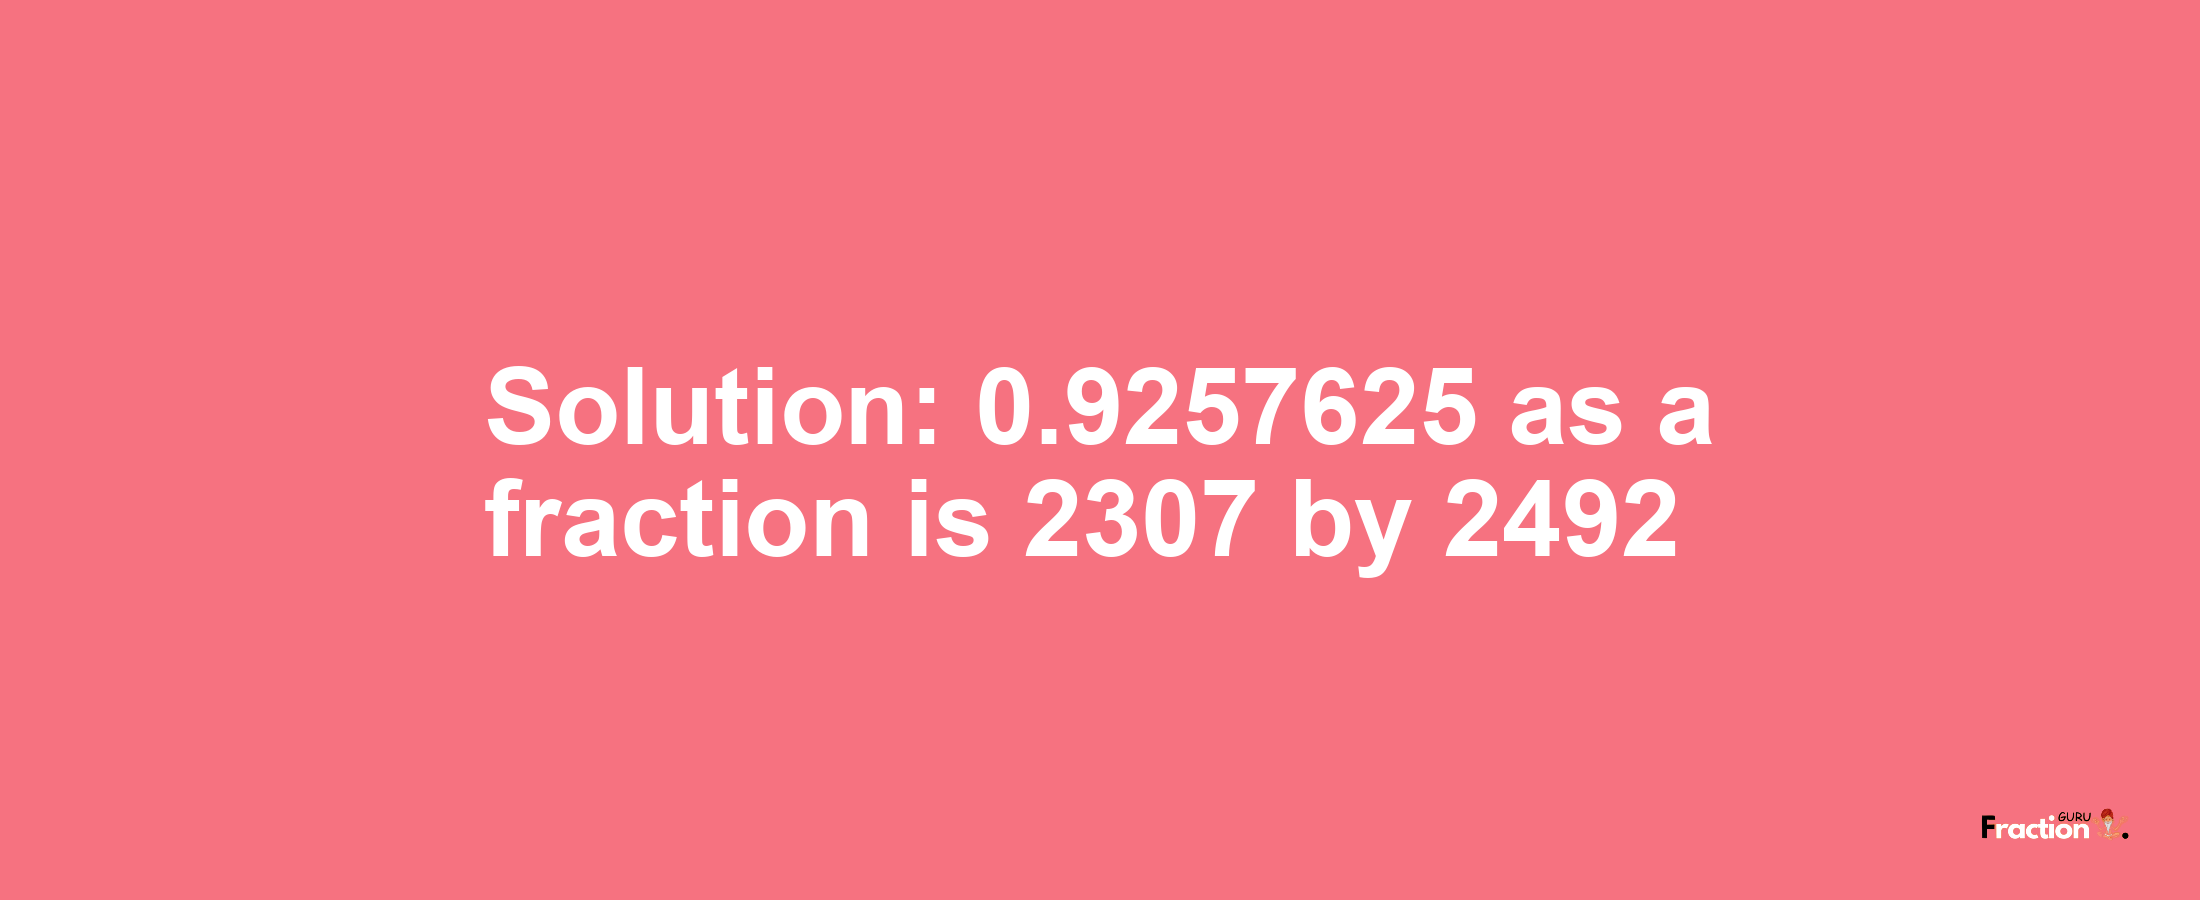 Solution:0.9257625 as a fraction is 2307/2492